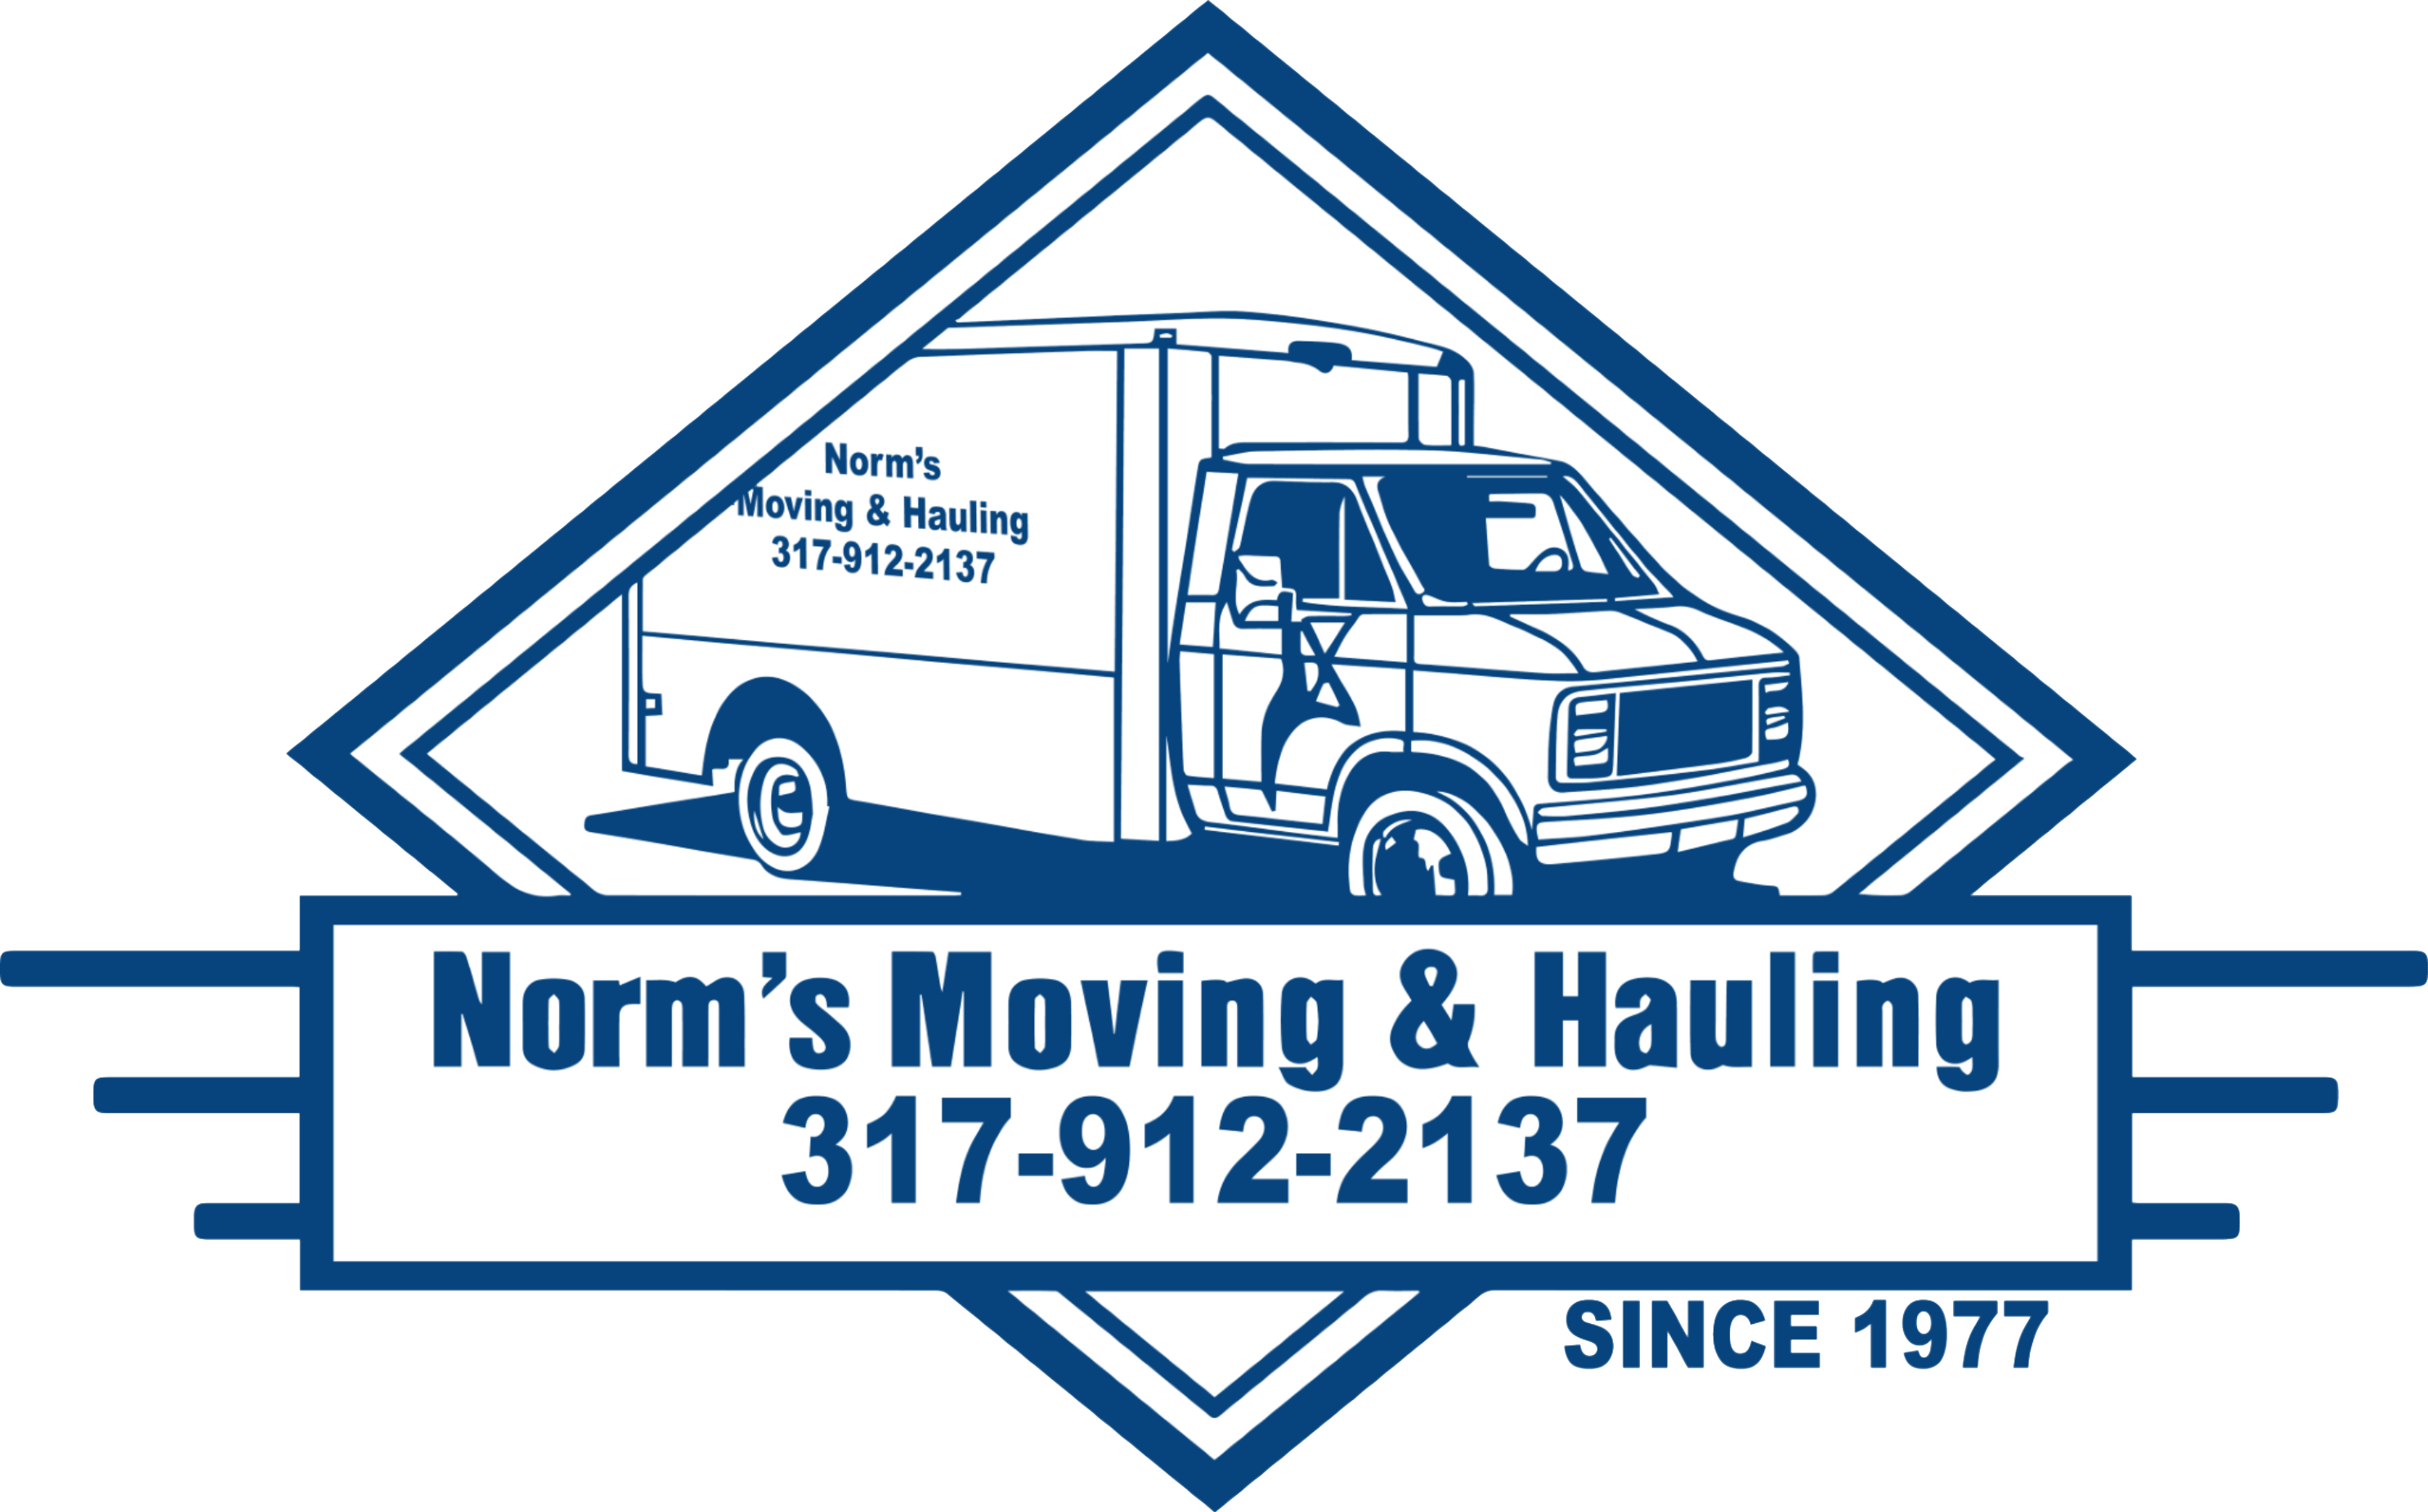 Hauling Logo - About Us - Norms Moving and Hauling in Indianapolis, Indiana